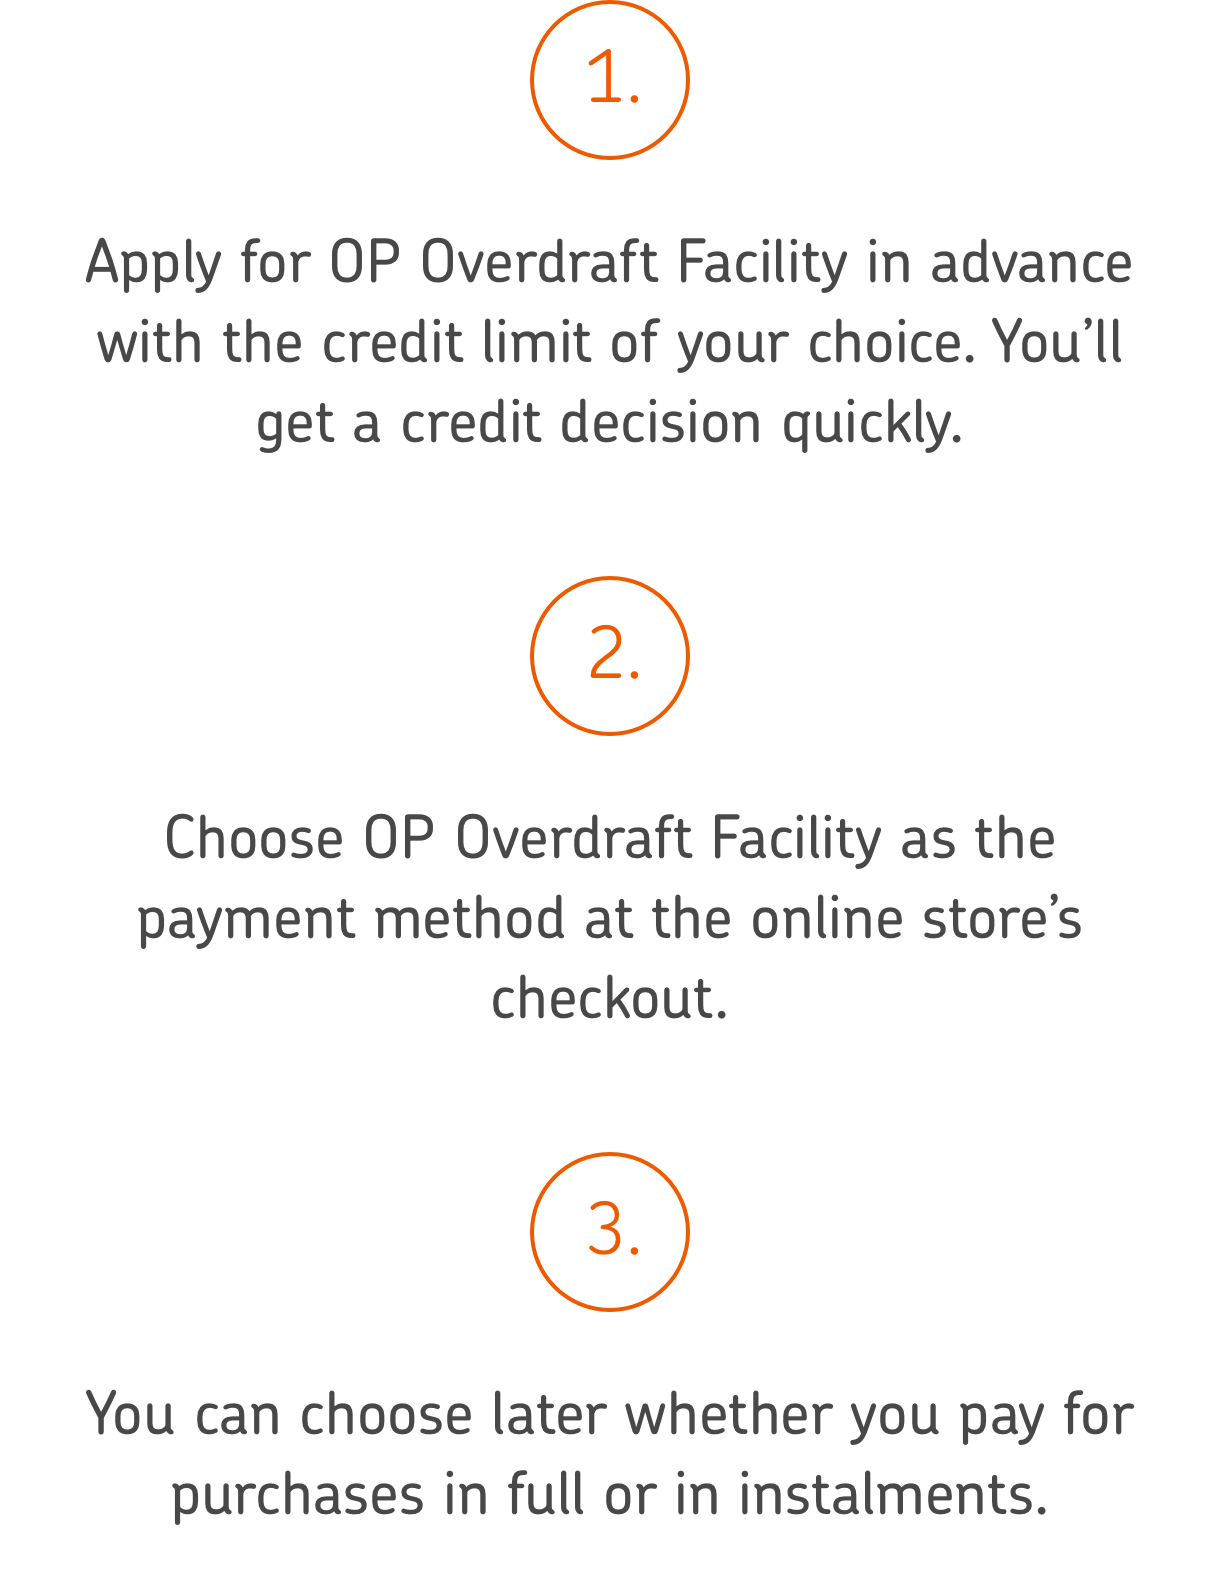 1. Apply for OP Overdraft Facility in advance with the credit limit of your choice. You’ll get a credit decision quickly. 2. Choose OP Overdraft Facility as the payment method at the online store’s checkout. 3. You can choose later whether you pay for purchases in full or in instalments.